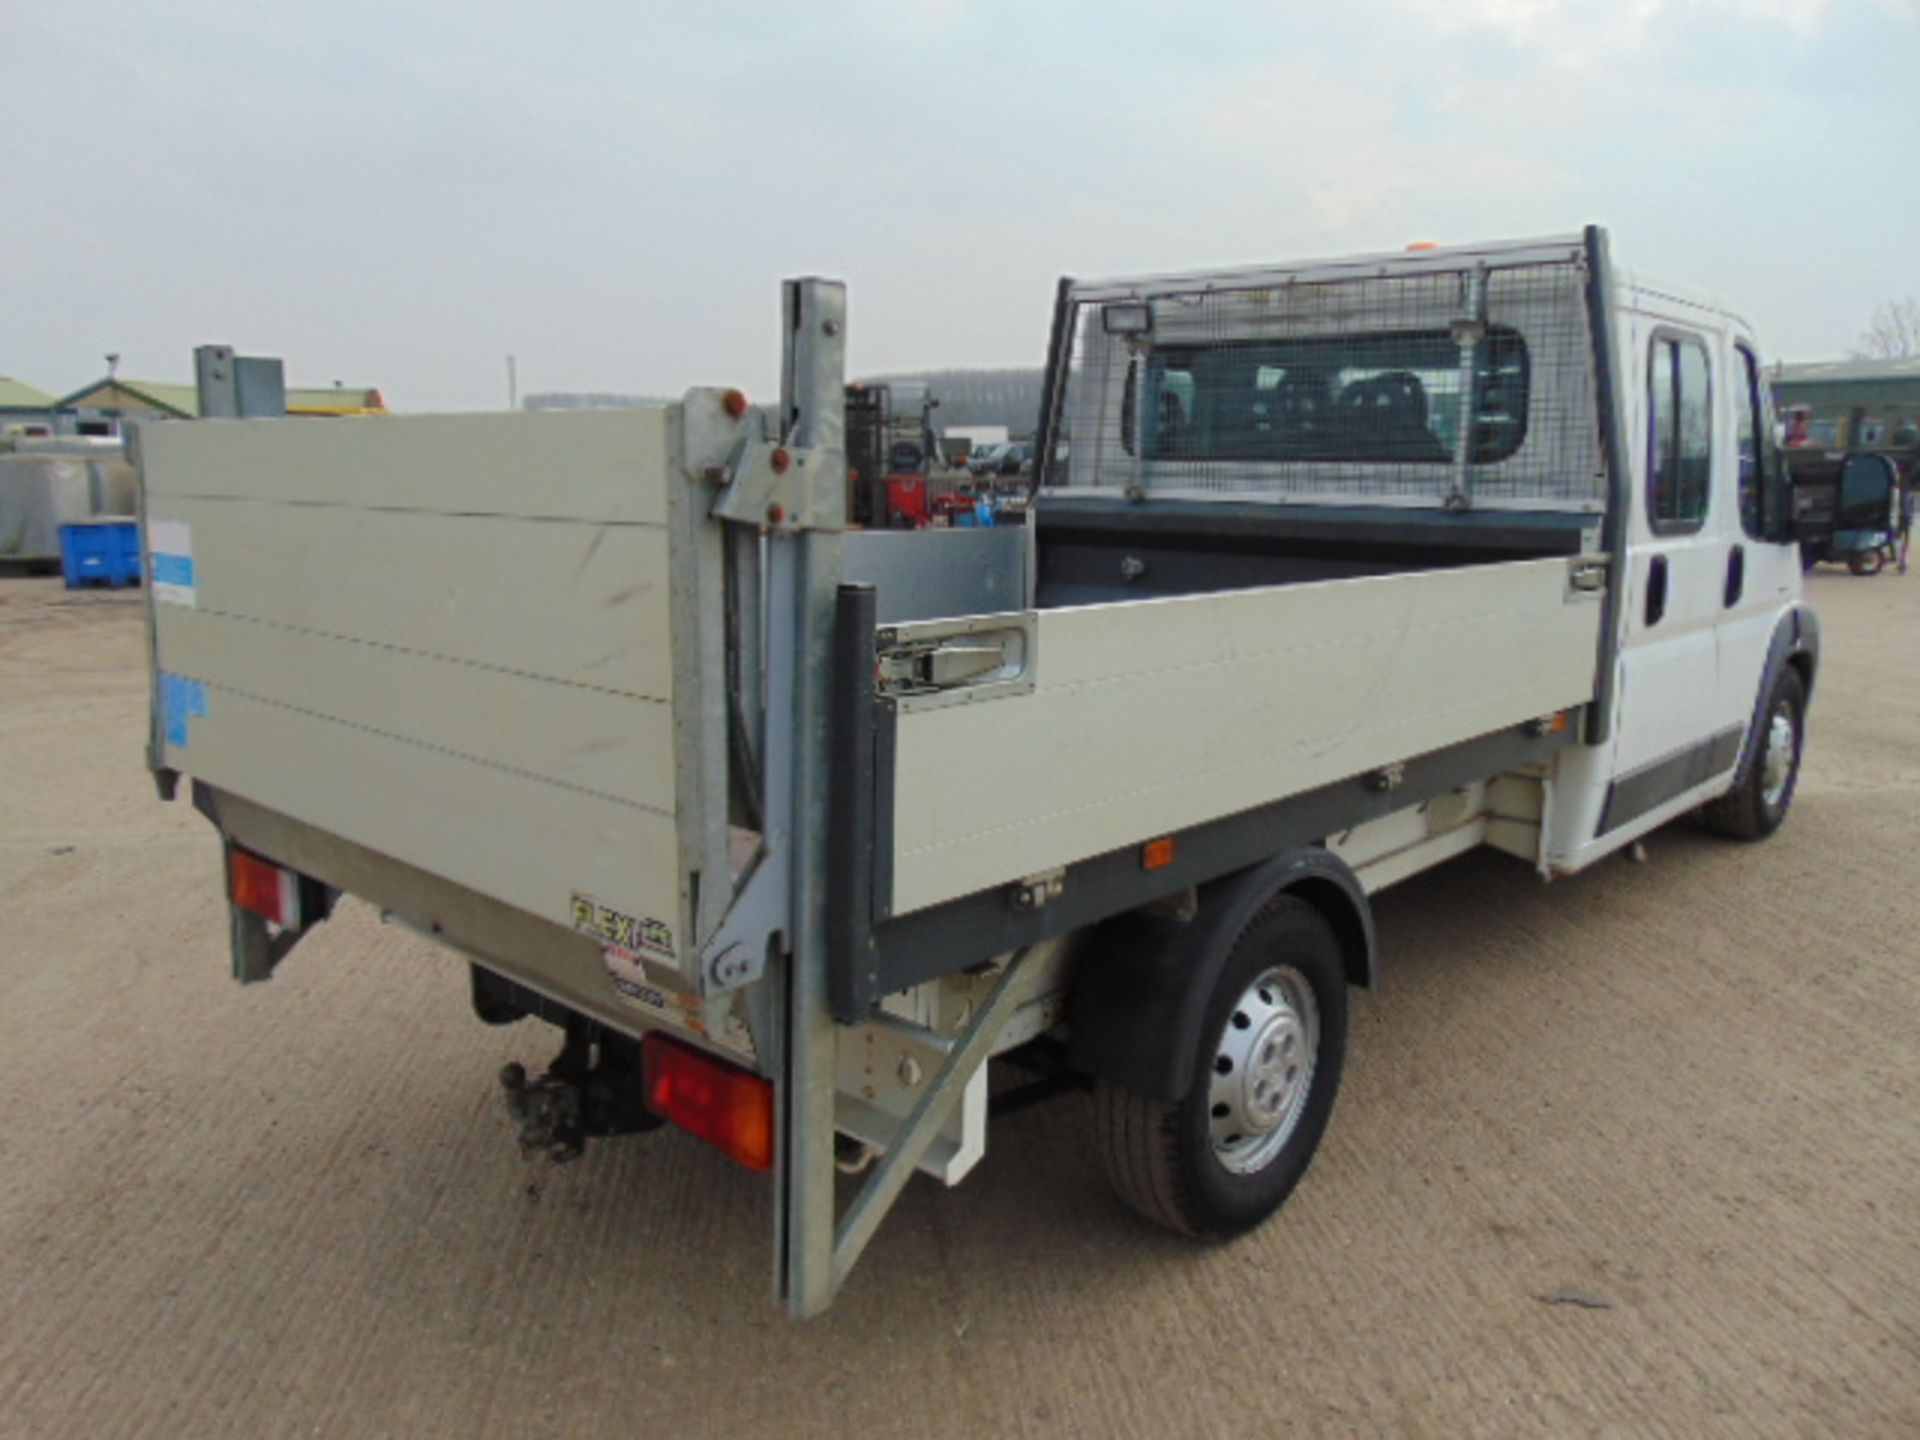 Citroen Relay 7 Seater Double Cab Dropside Pickup with 500kg Ratcliff Palfinger Tail Lift - Image 7 of 27